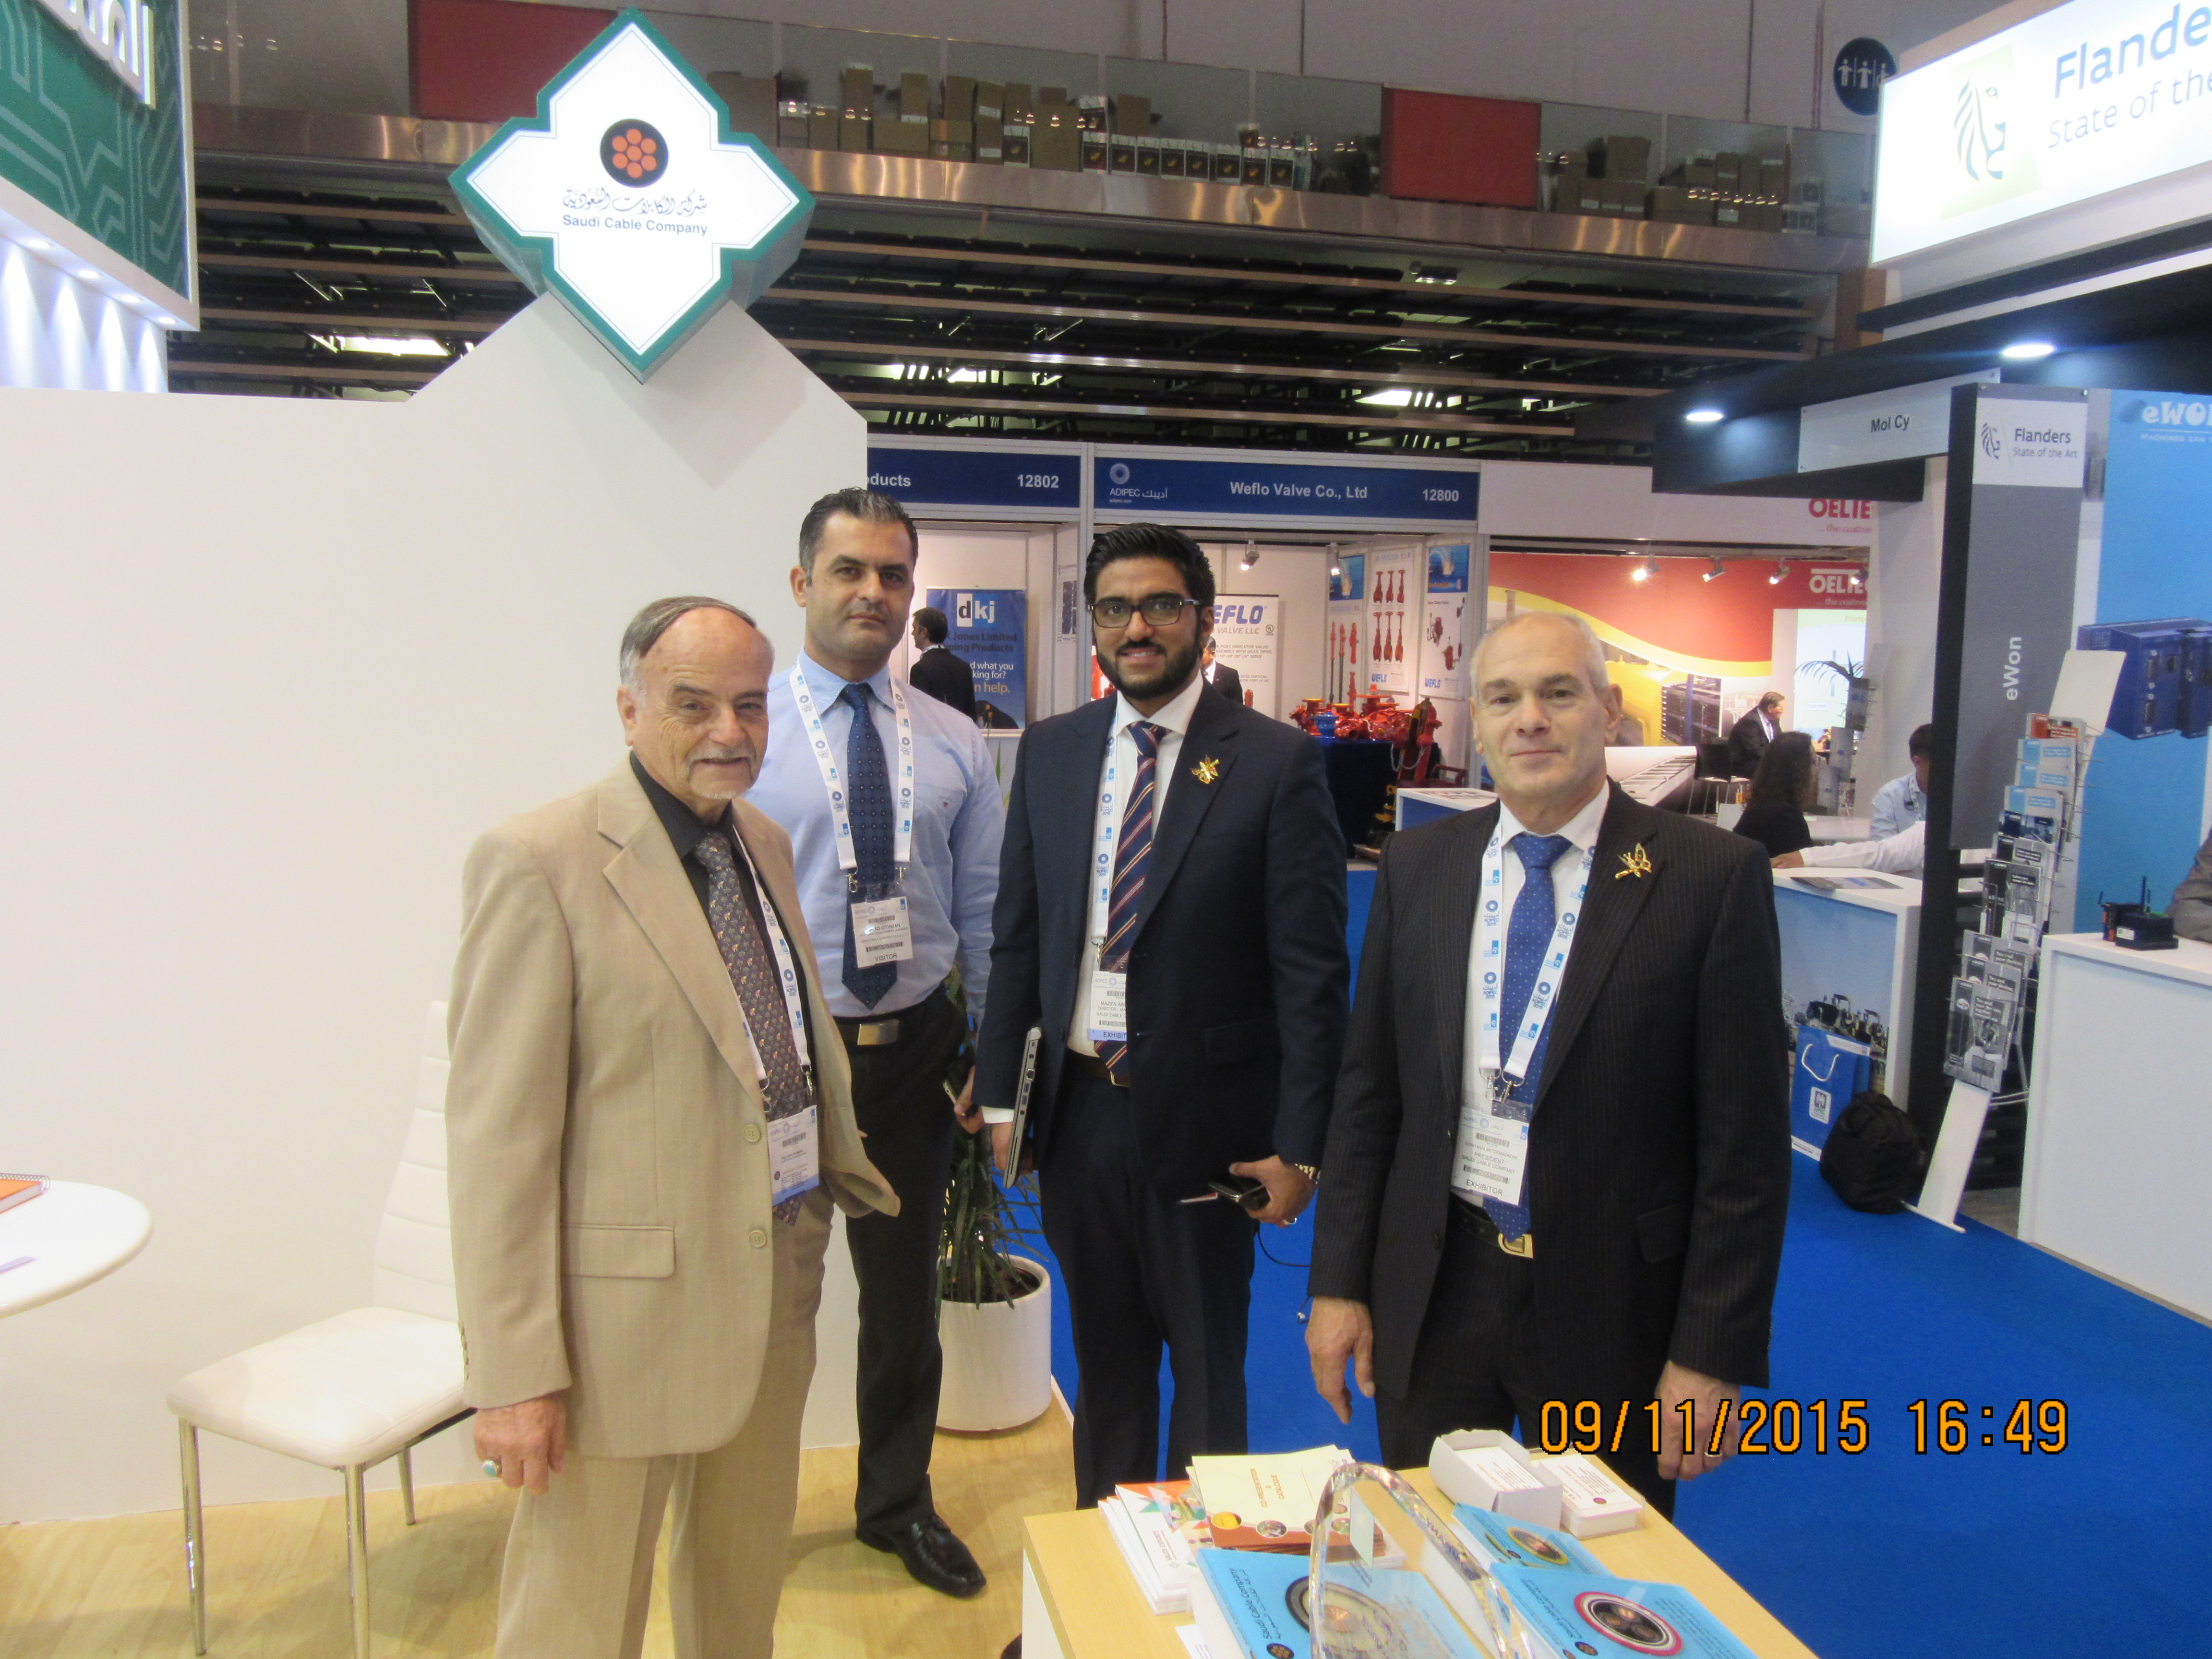 ADIPEC – largest Oil & Gas event in Abu Dhabi